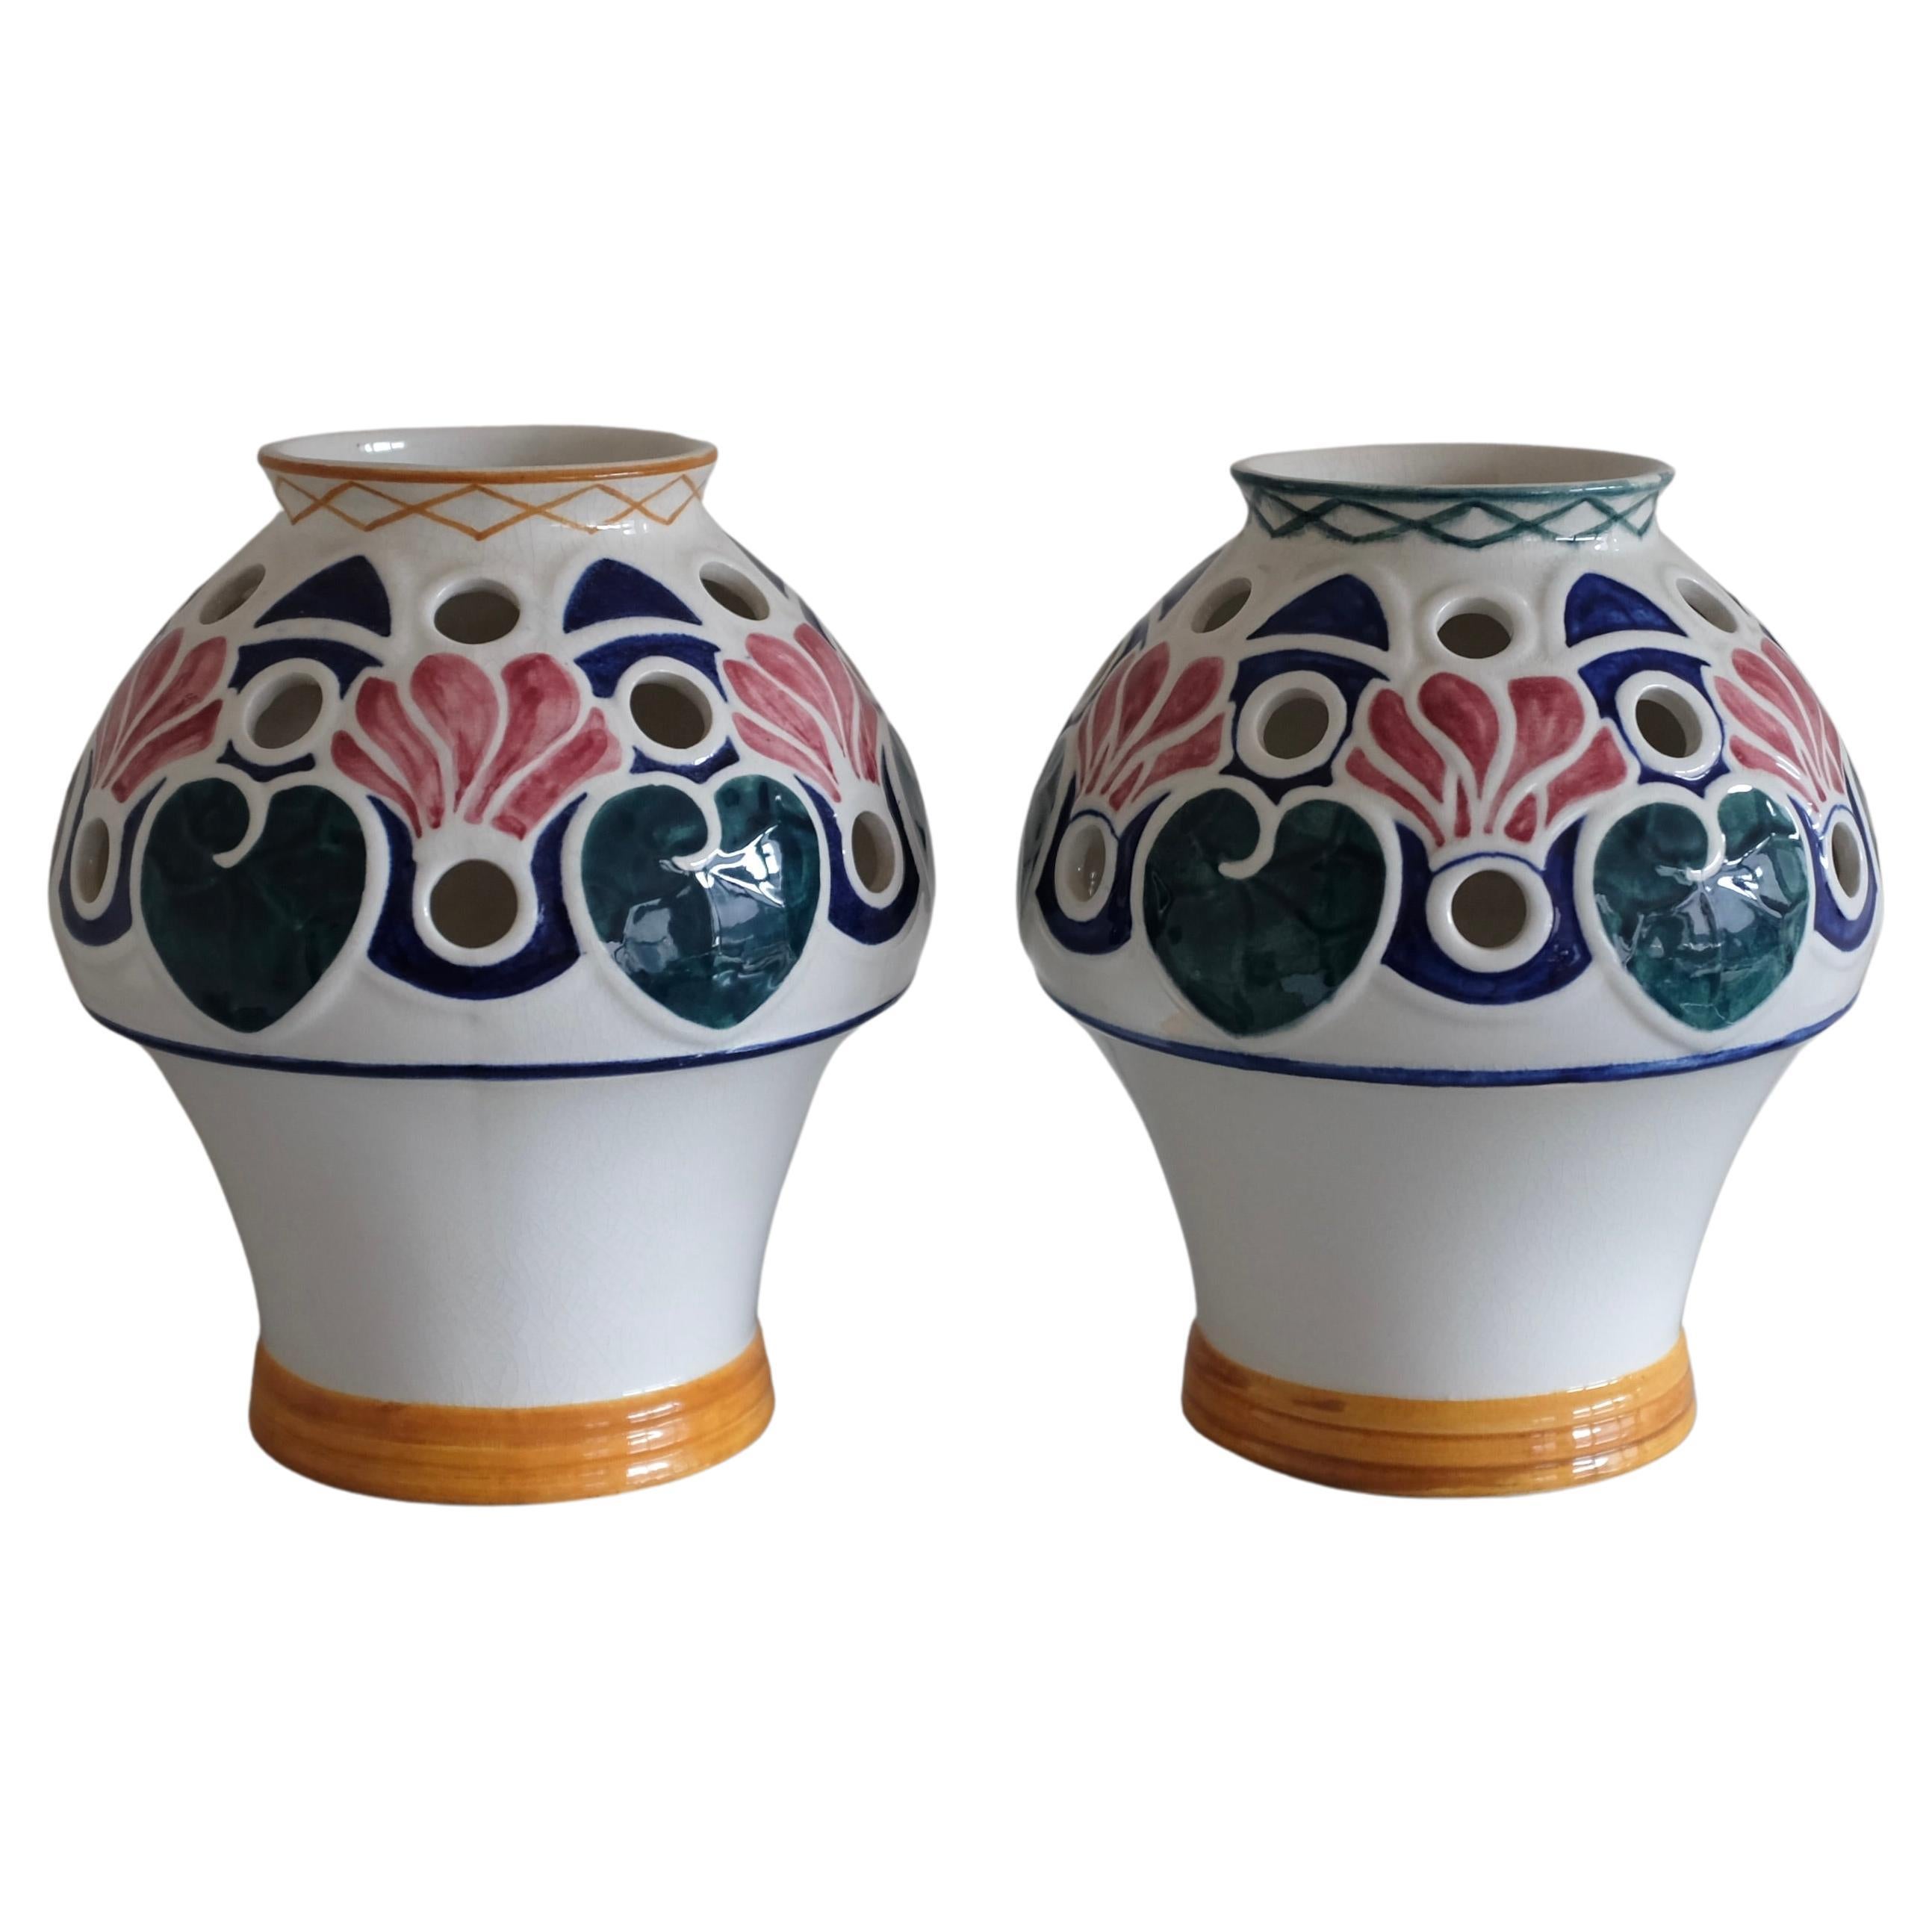 Pair of Early 20th century Ceramic Vases by Alf Wallander For Sale